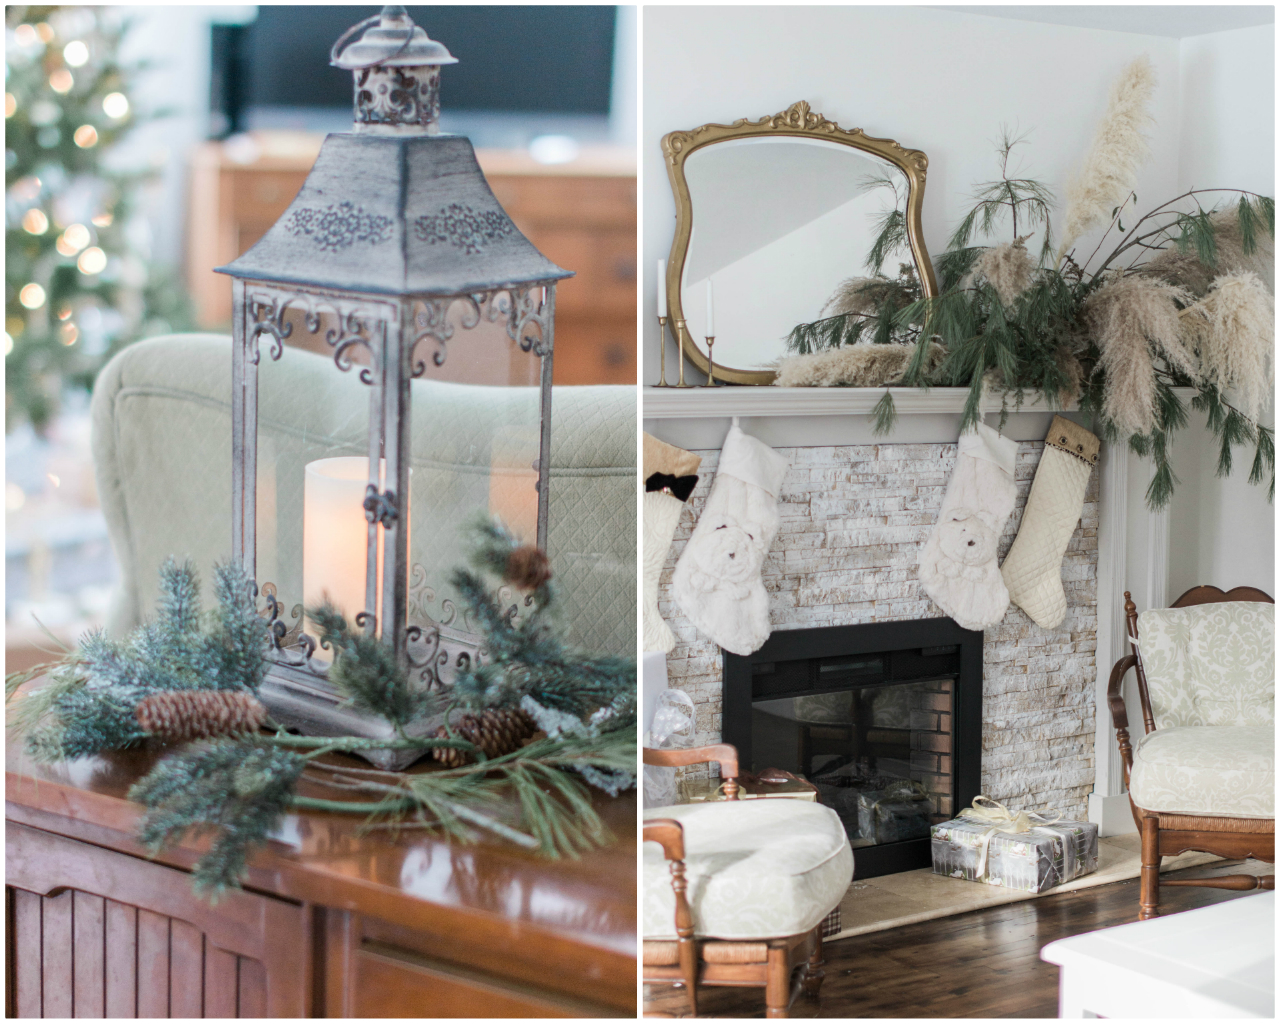 Rustic Christmas Decor | The Day's Design